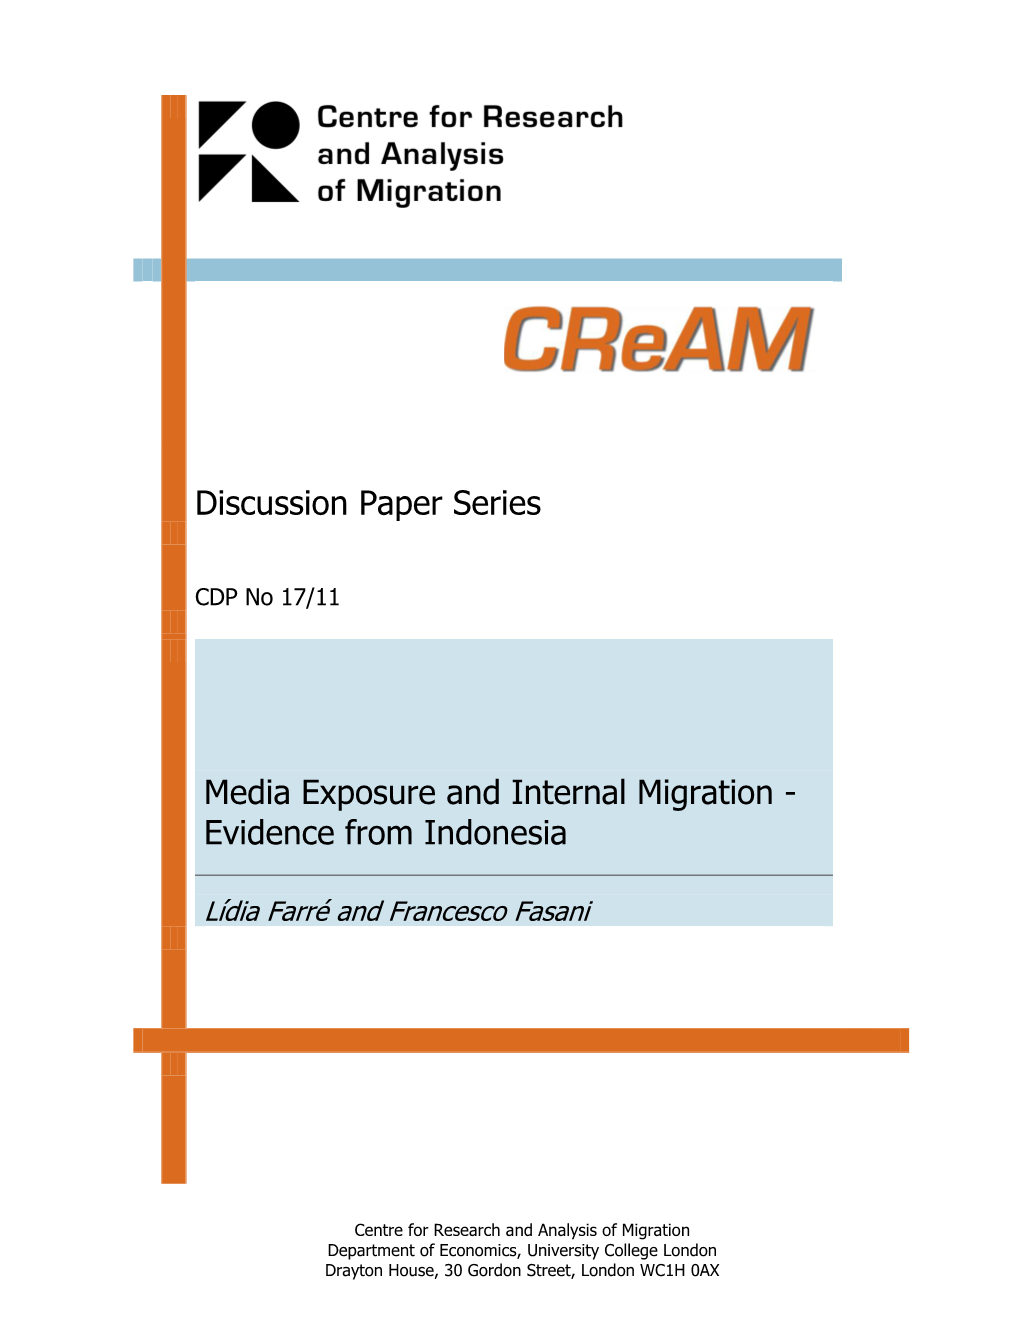 Media Exposure and Internal Migration - Evidence from Indonesia